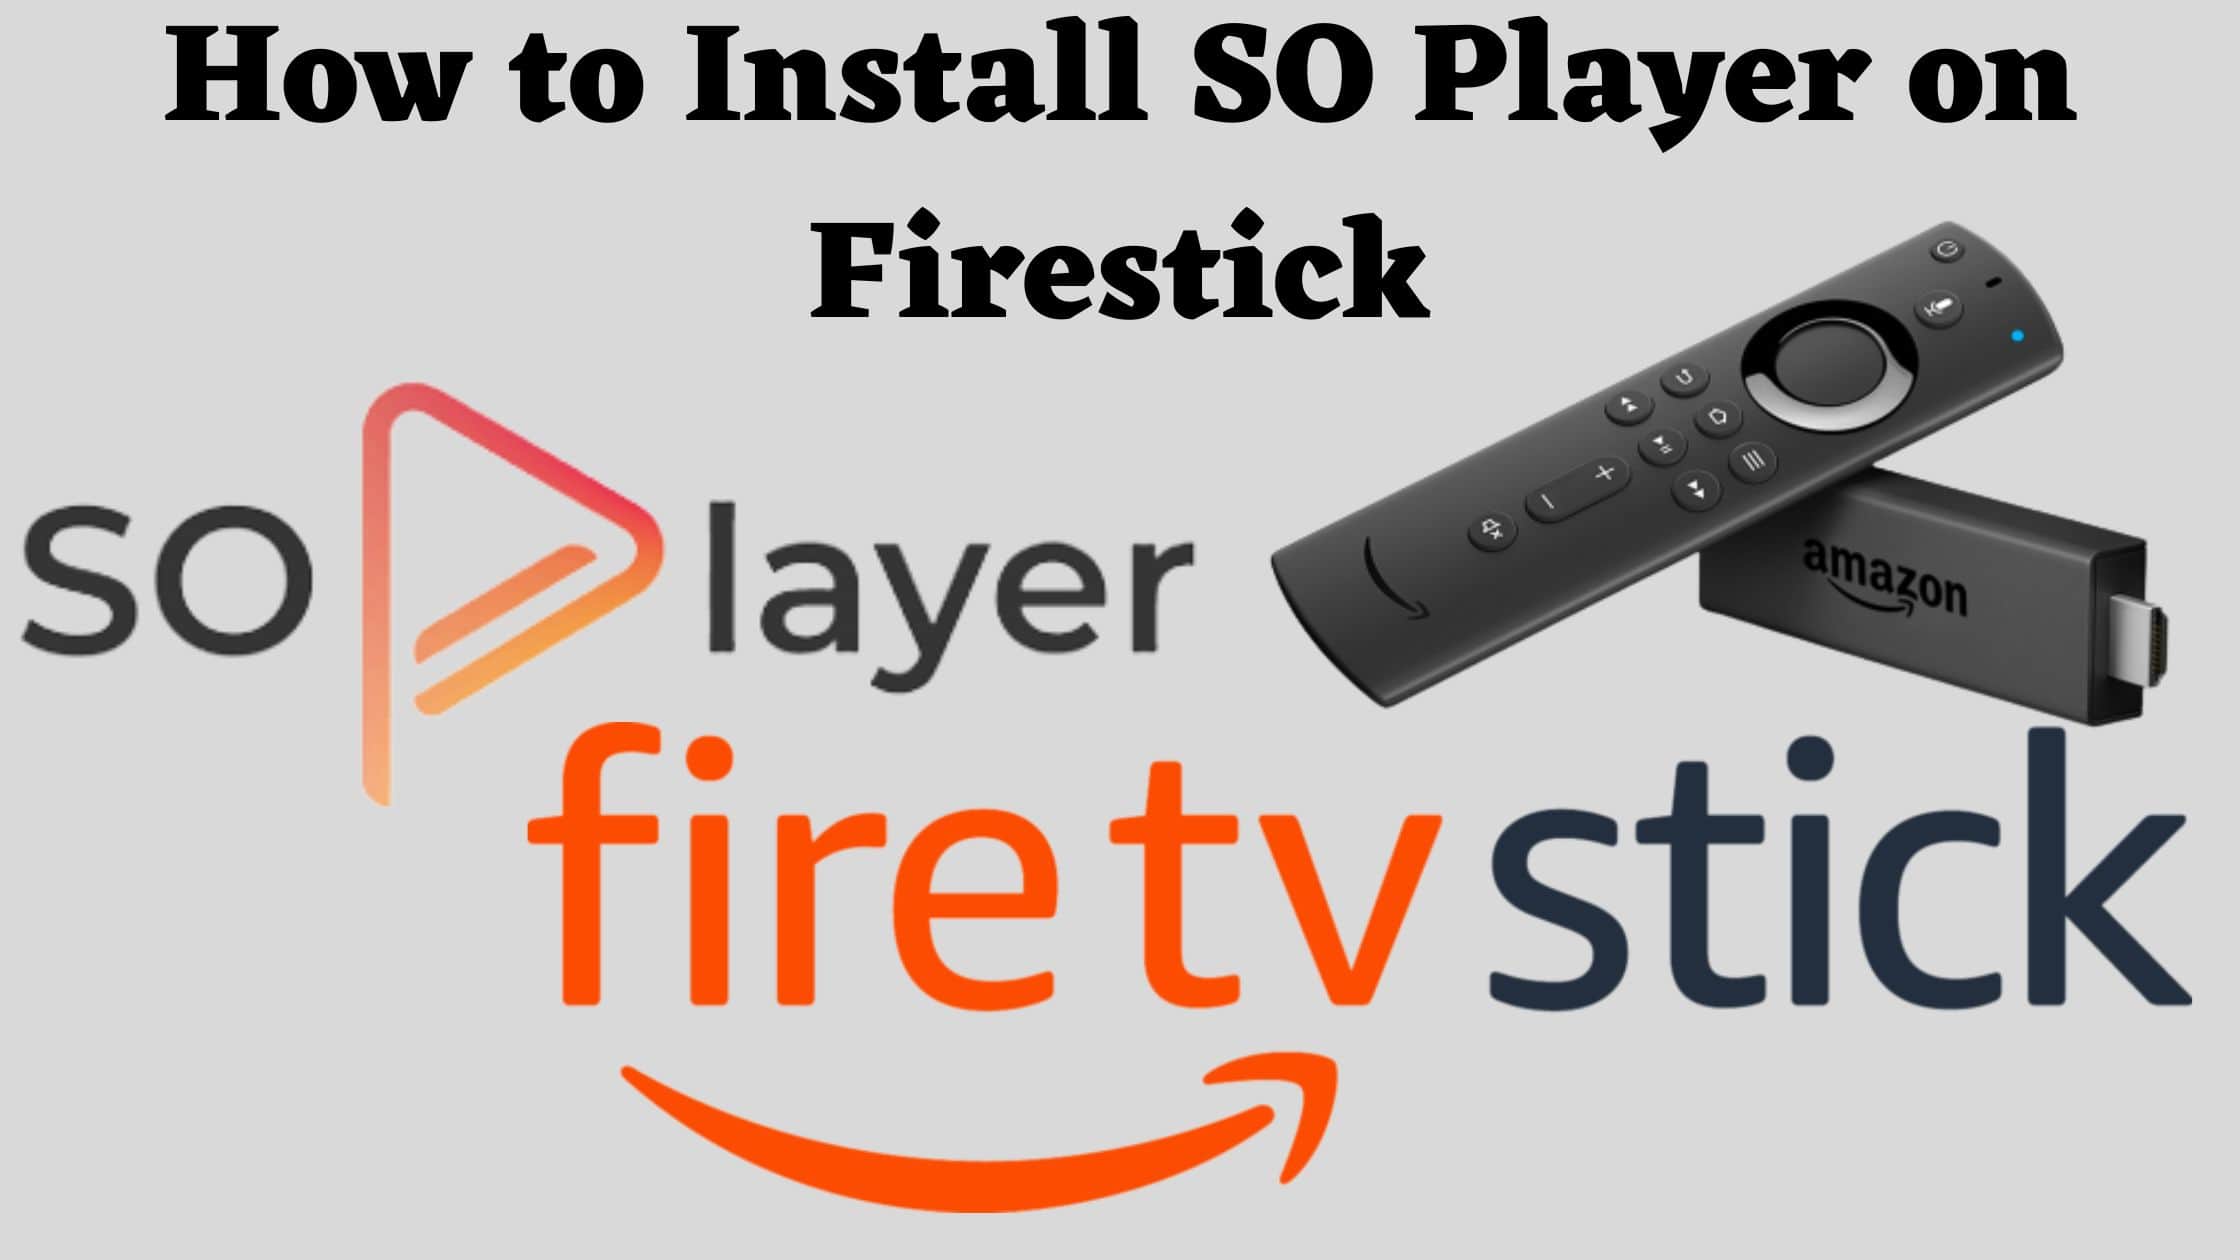 How to Install SO Player on Firestick